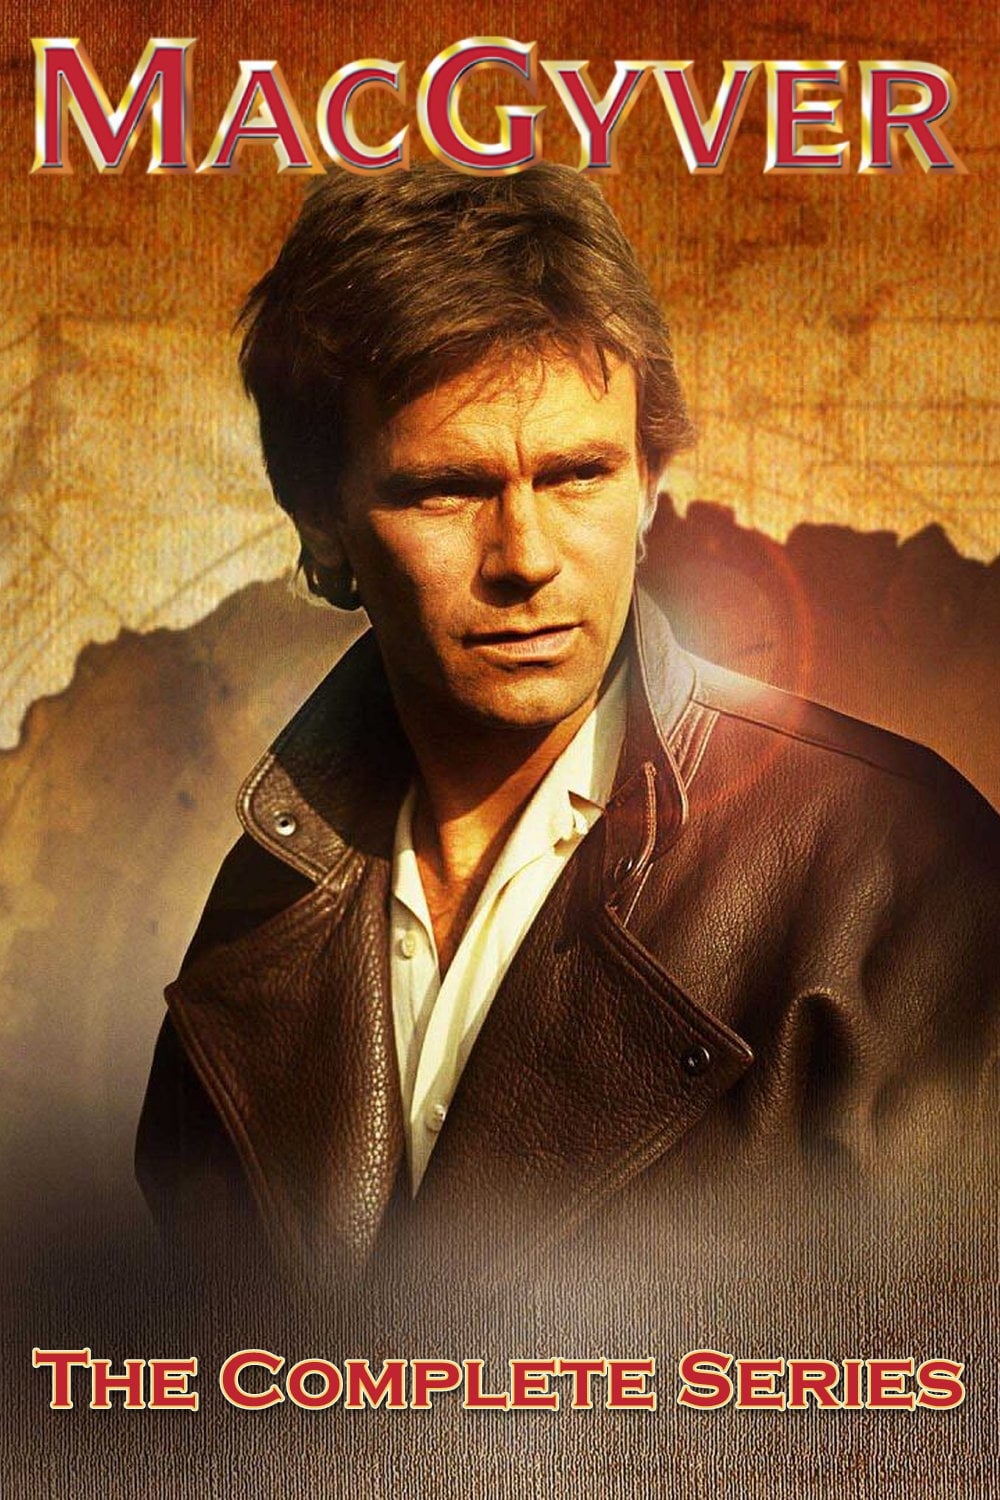 MacGyver TV Shows About Macgyver